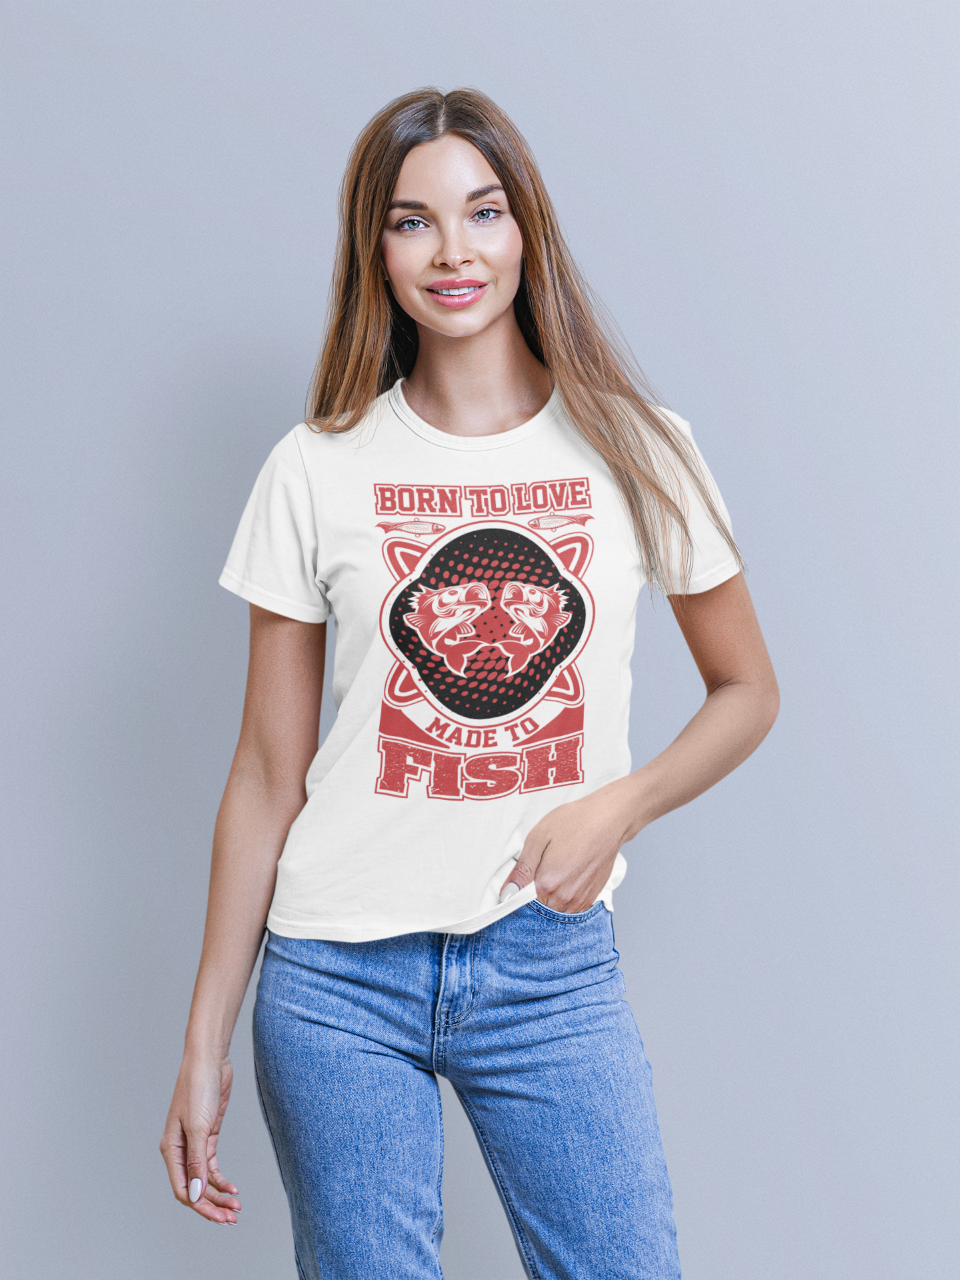 Born To Love Made To Fish - T-Shirt